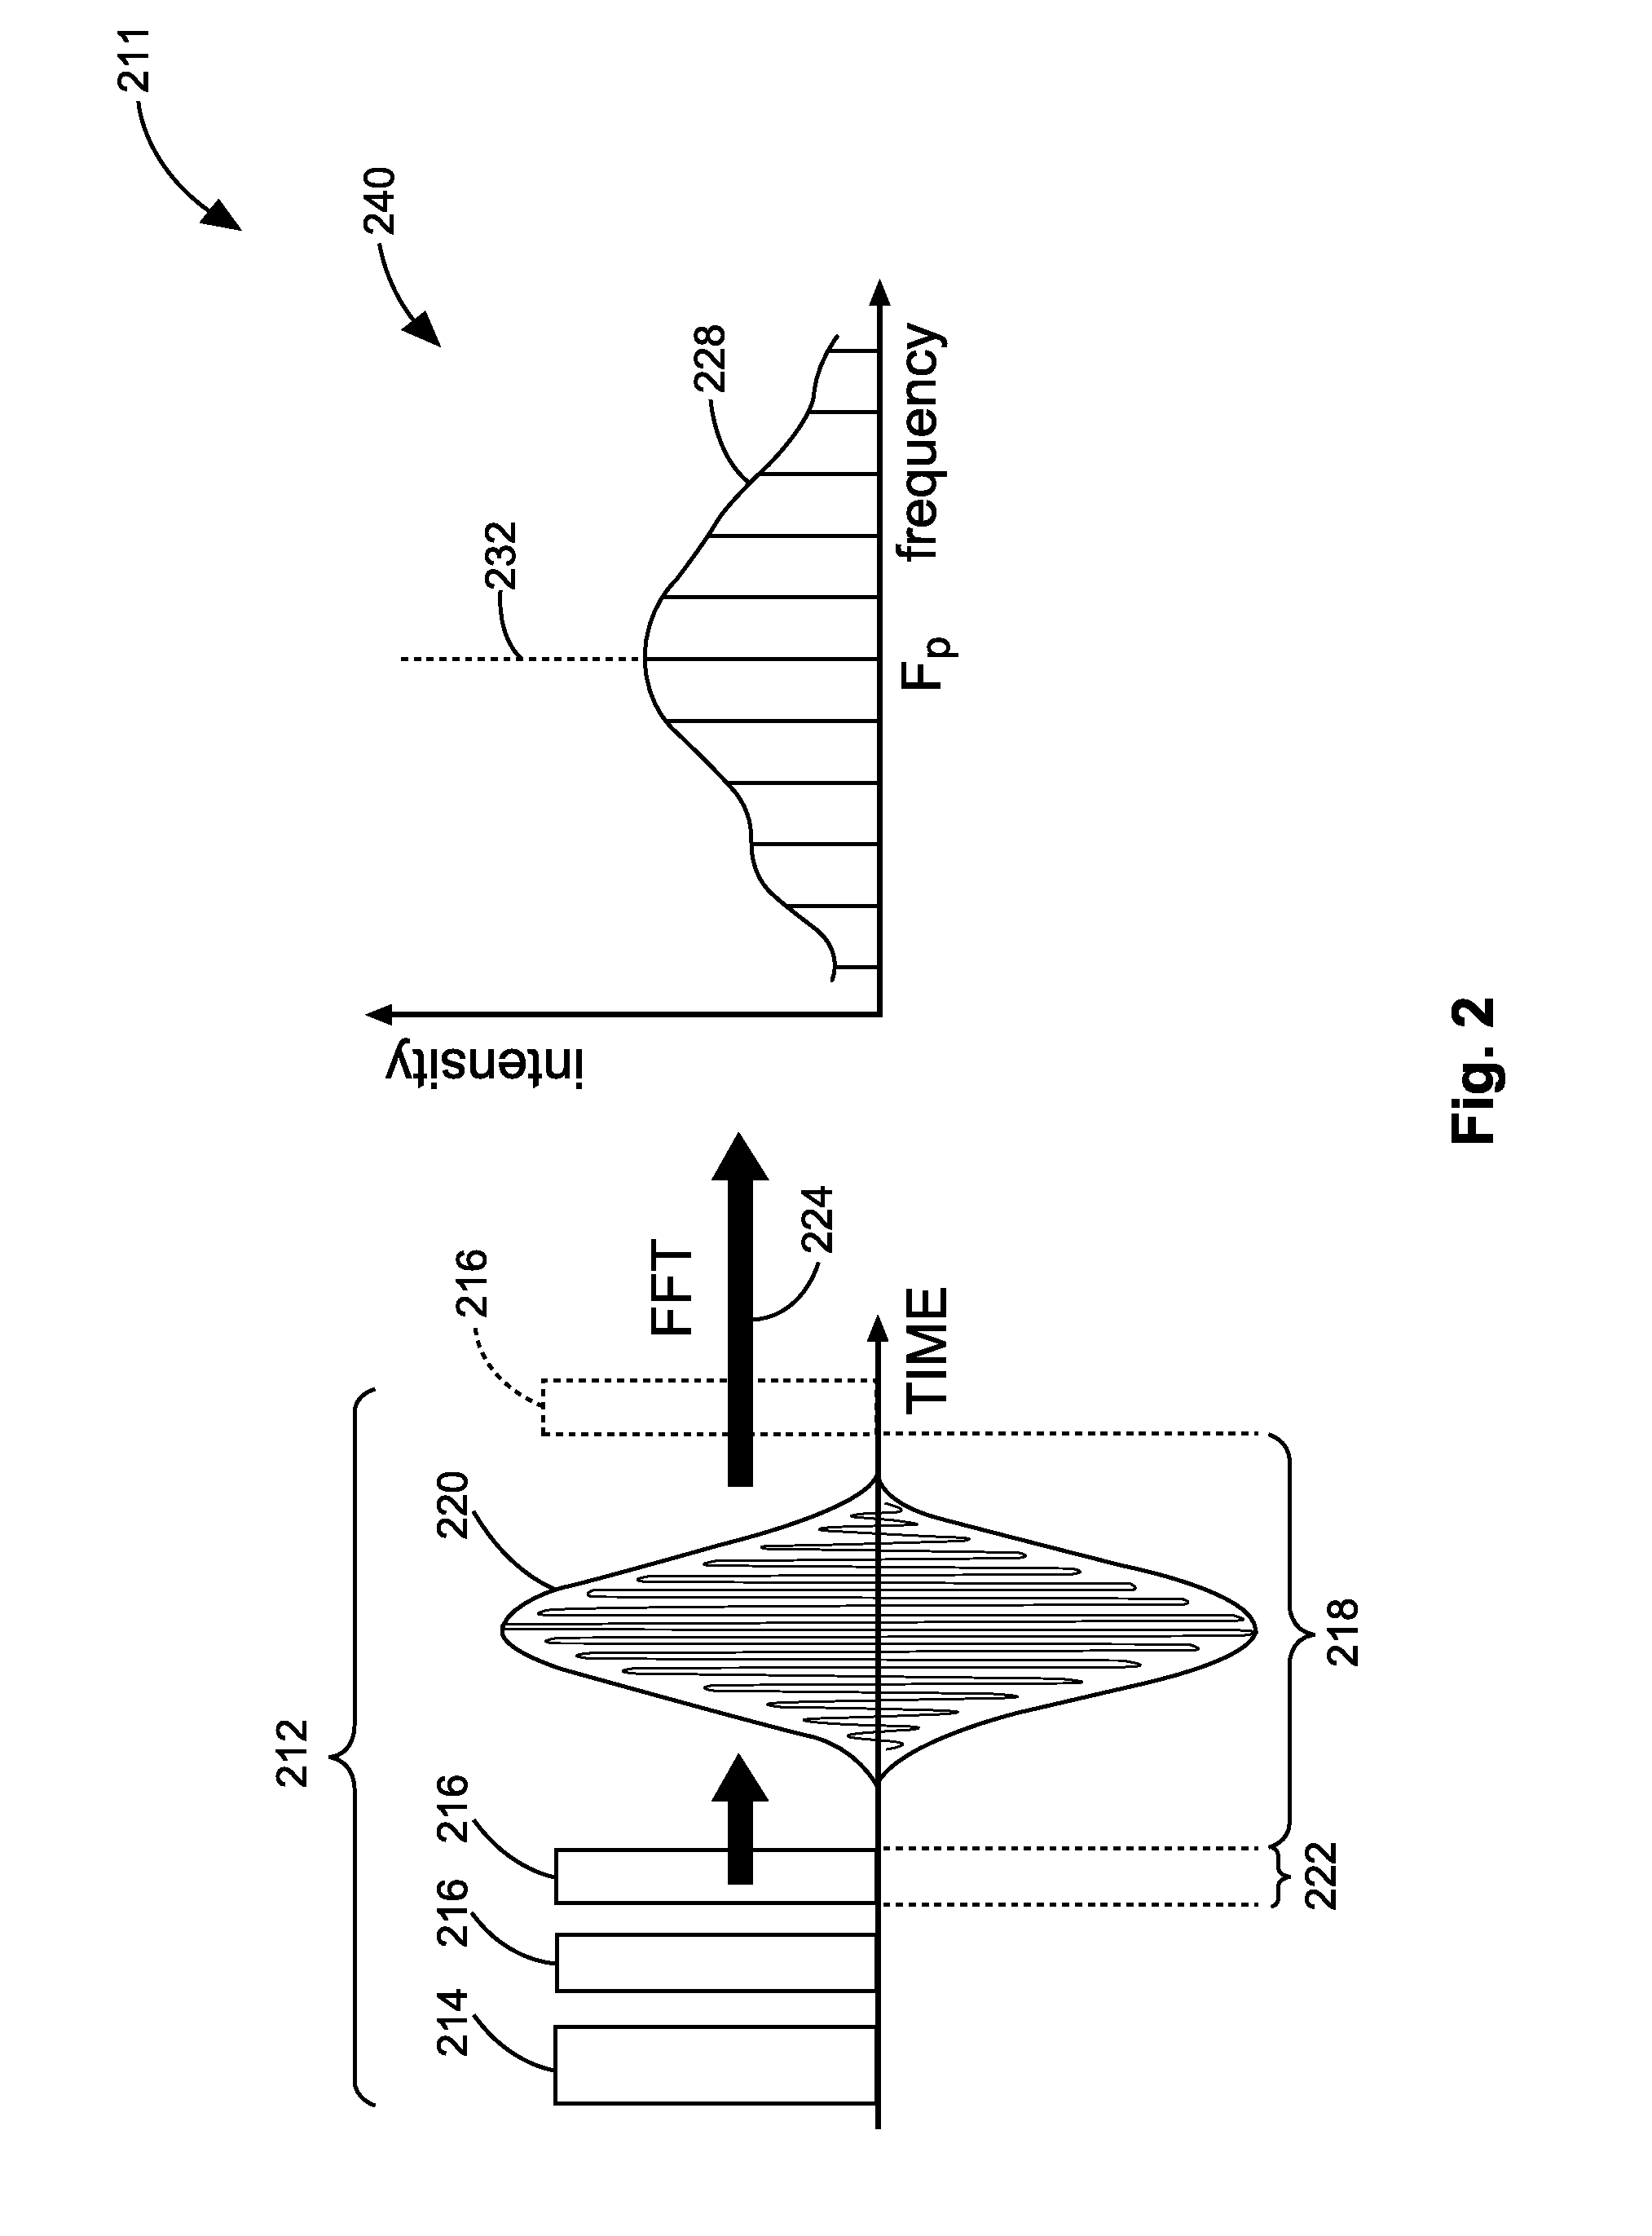 Frequency location apparatus, methods, and systems